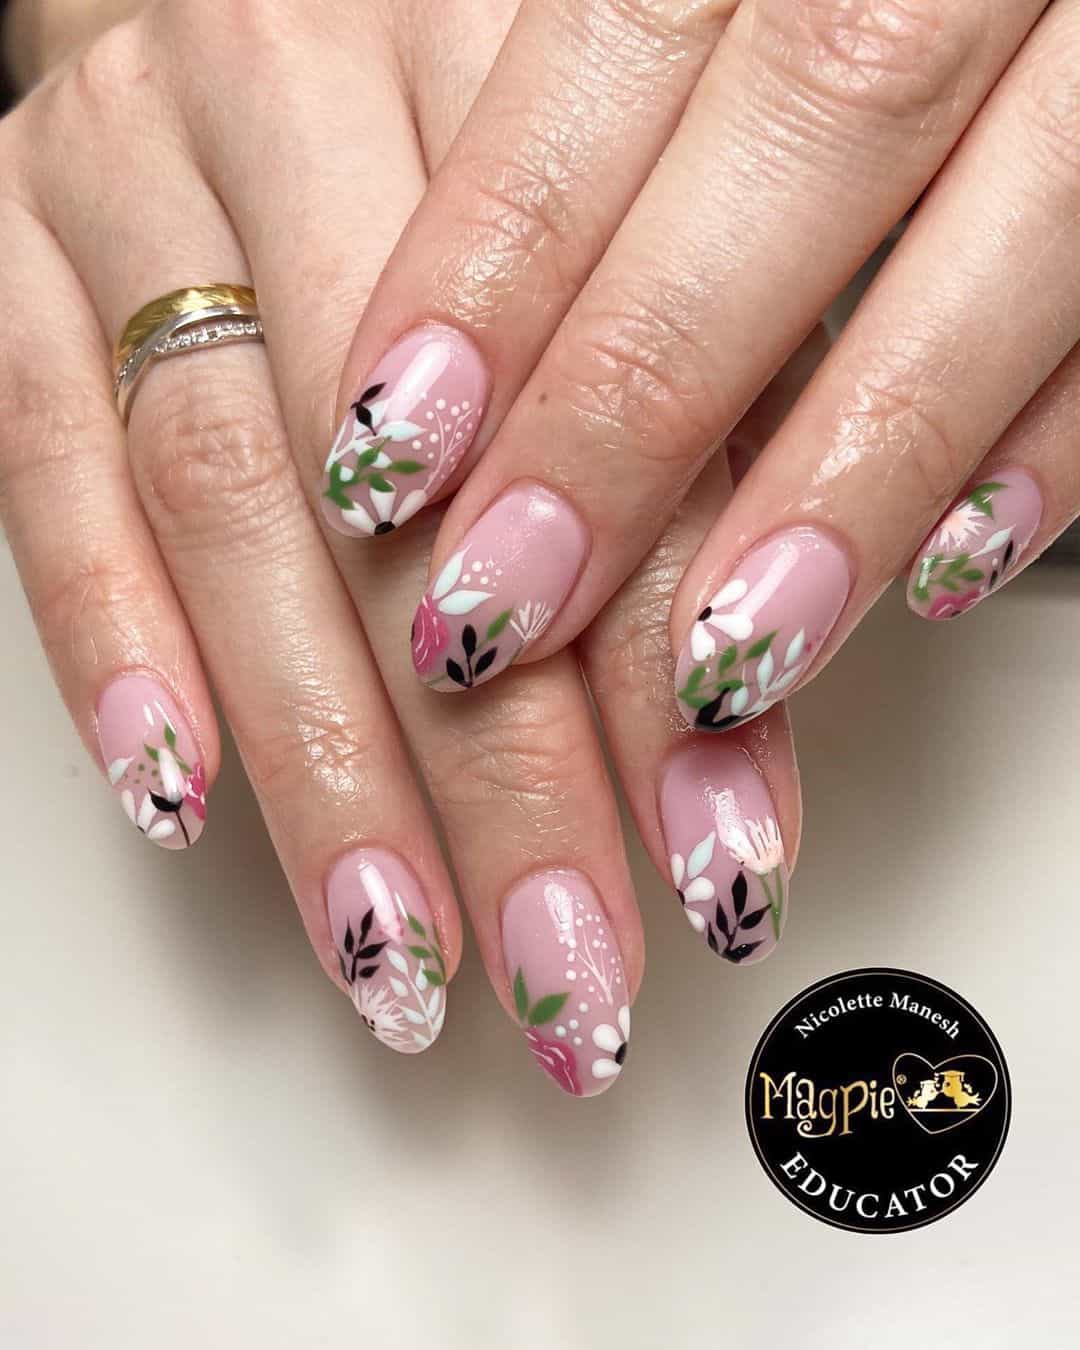 Are you ready for summer? Just check out our post on Summer Nail Design Ideas. You will be ready to start in this hot summer sun with these amazing nail designs. #summer #nailart #nailideas #naildesigns